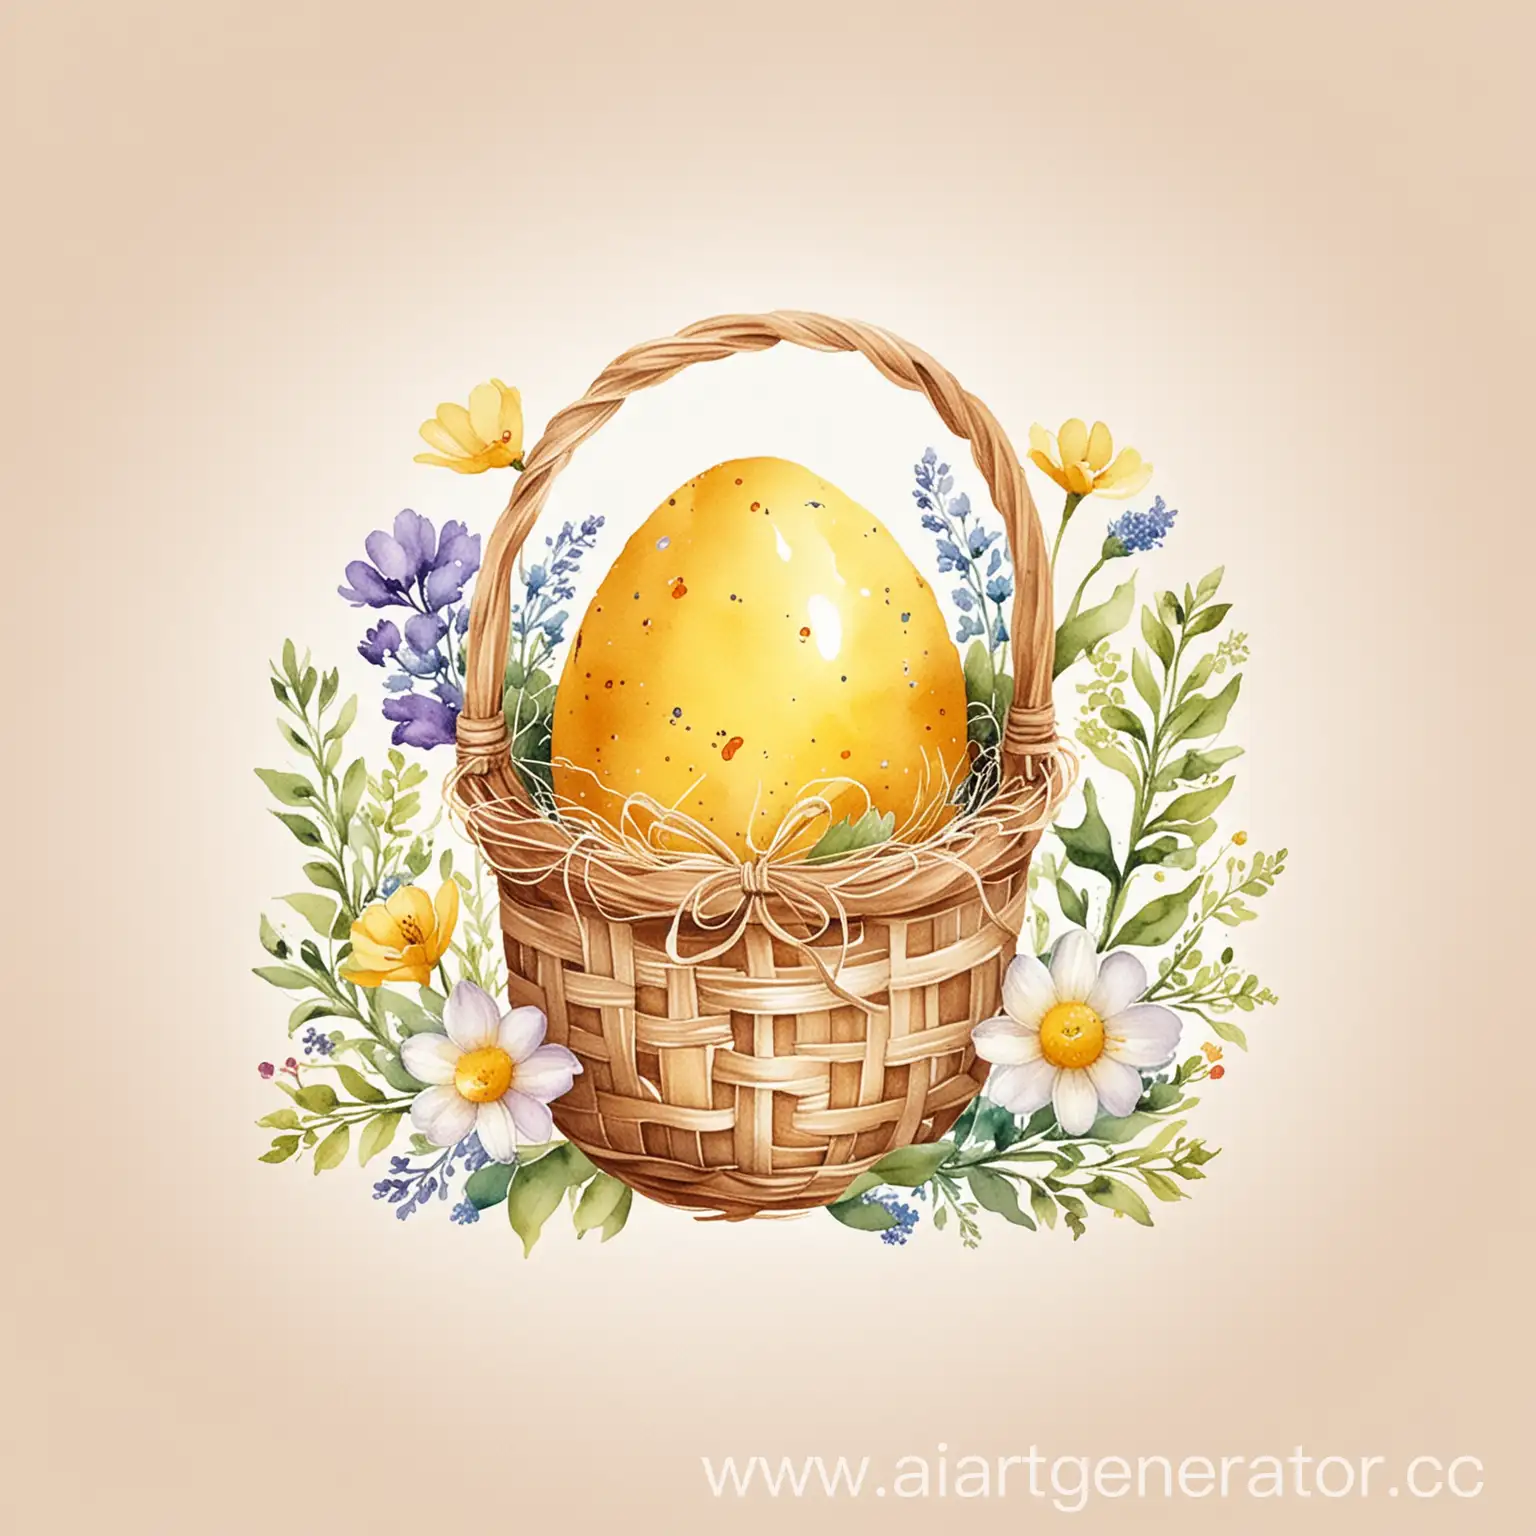 watercolor yellow little Easter basket with egg and flowers on white background